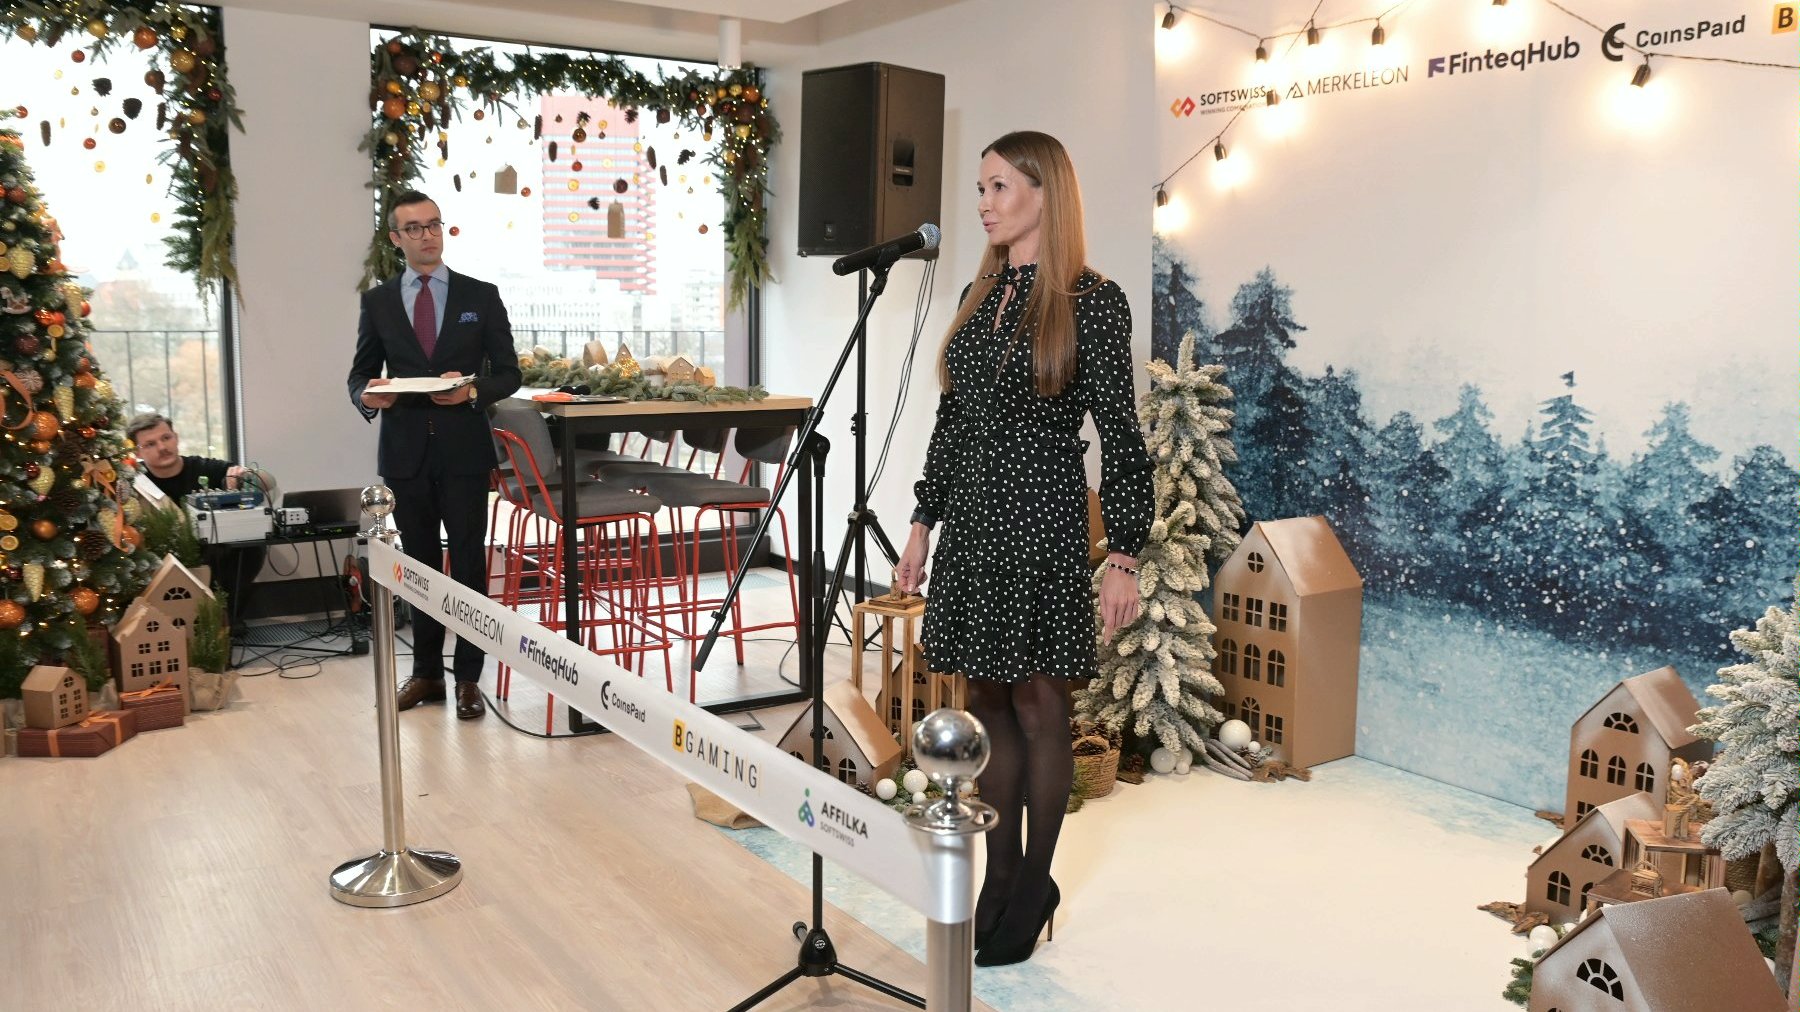 The photo shows Katja Lozina, director of the Investor Relations Department, speaking. In the background is a festive wall with company logos, including SOFTSWISS.